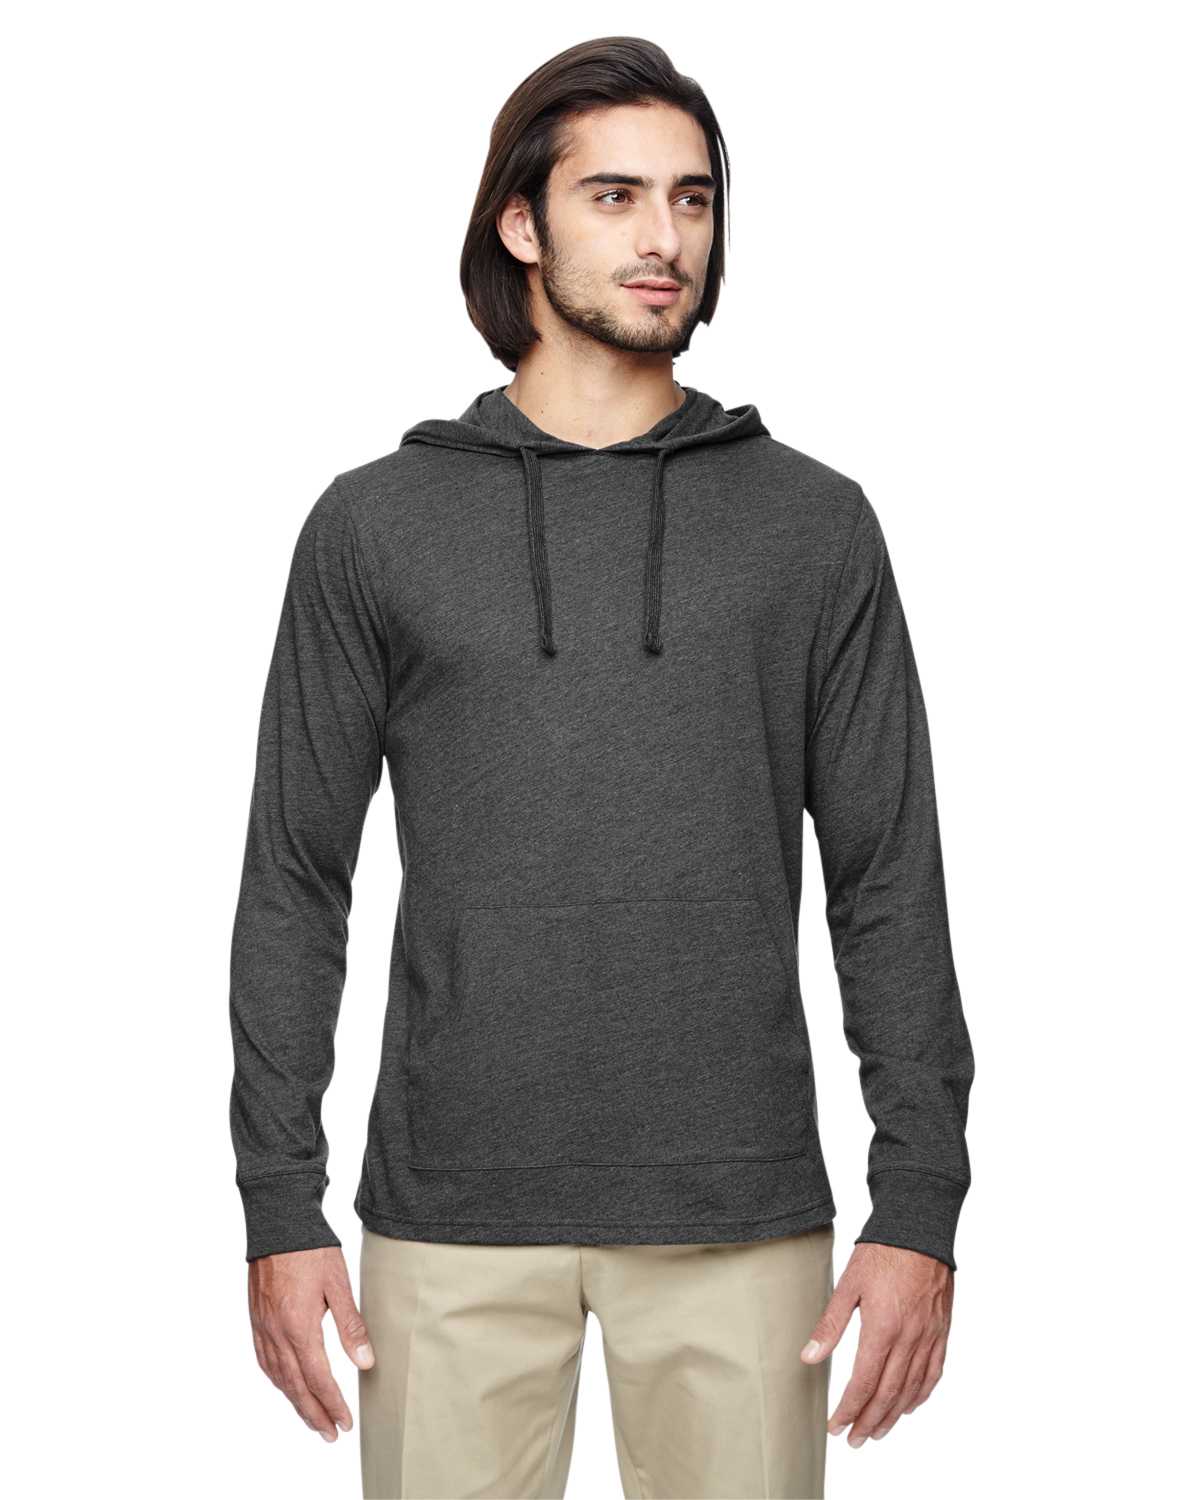 econscious EC1085 Unisex 4.25 oz. Blended Eco Jersey Pullover Hoodie ...